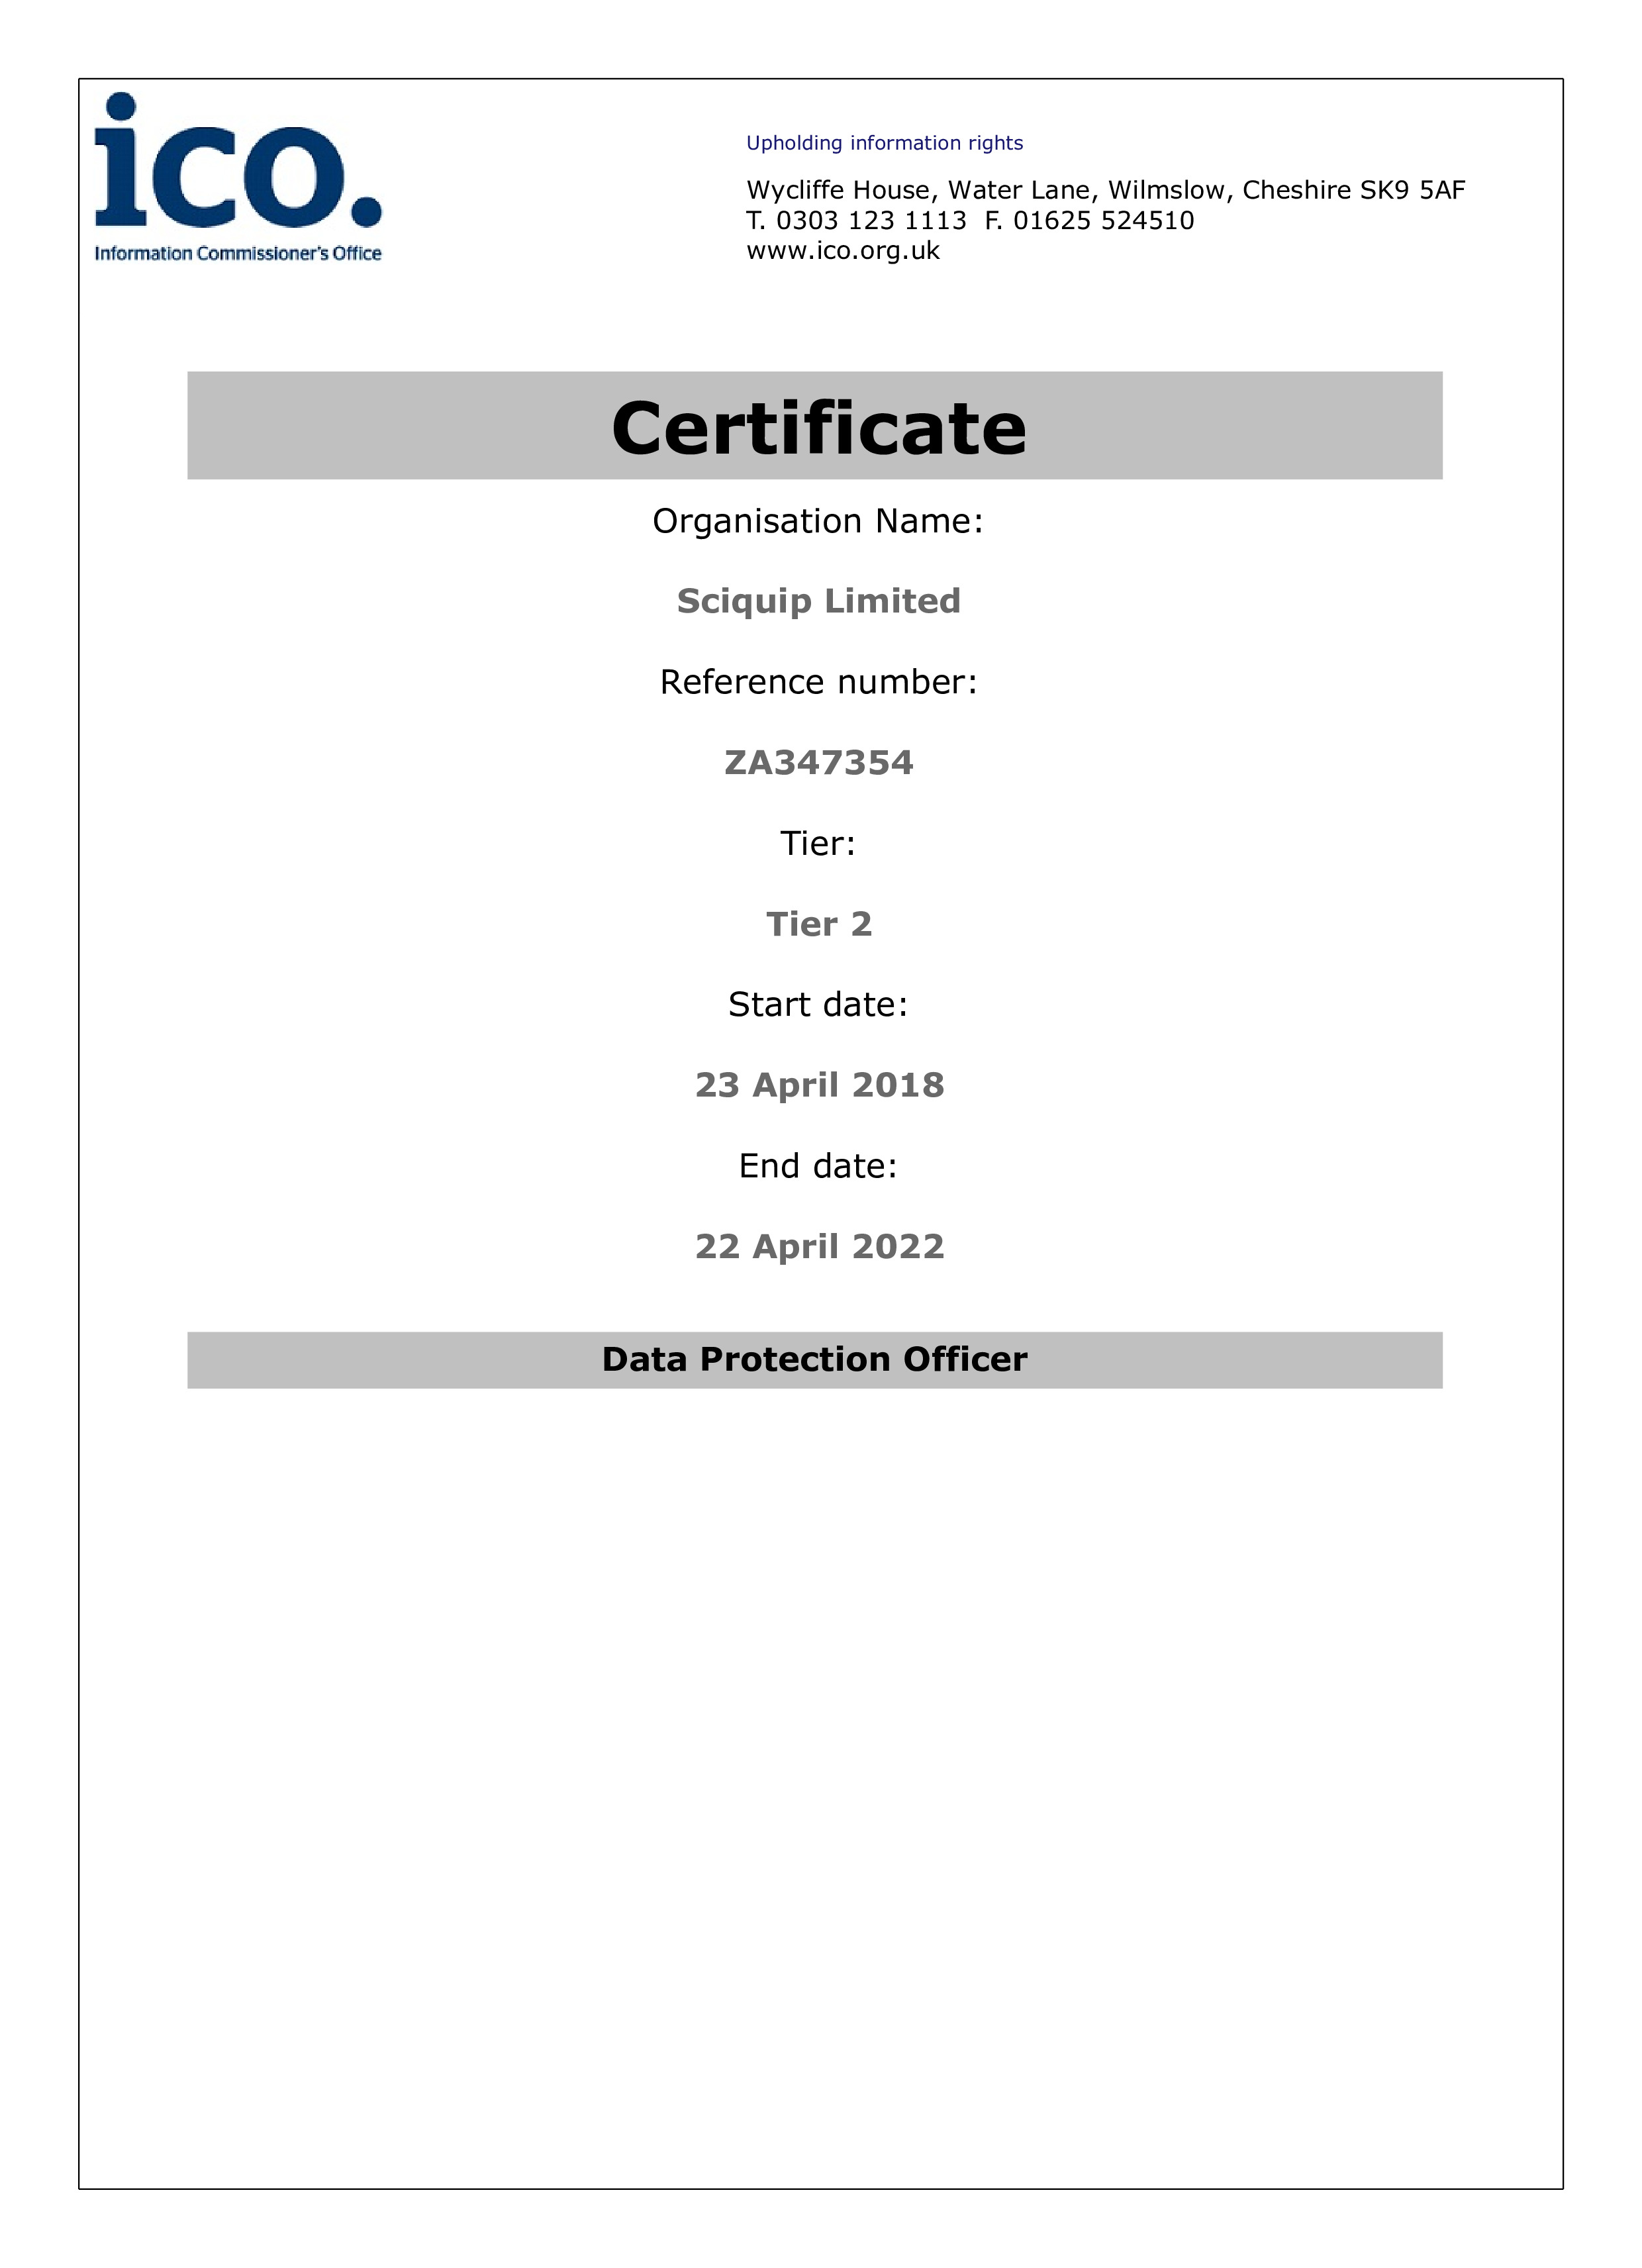 Data Protection Registration Certificate